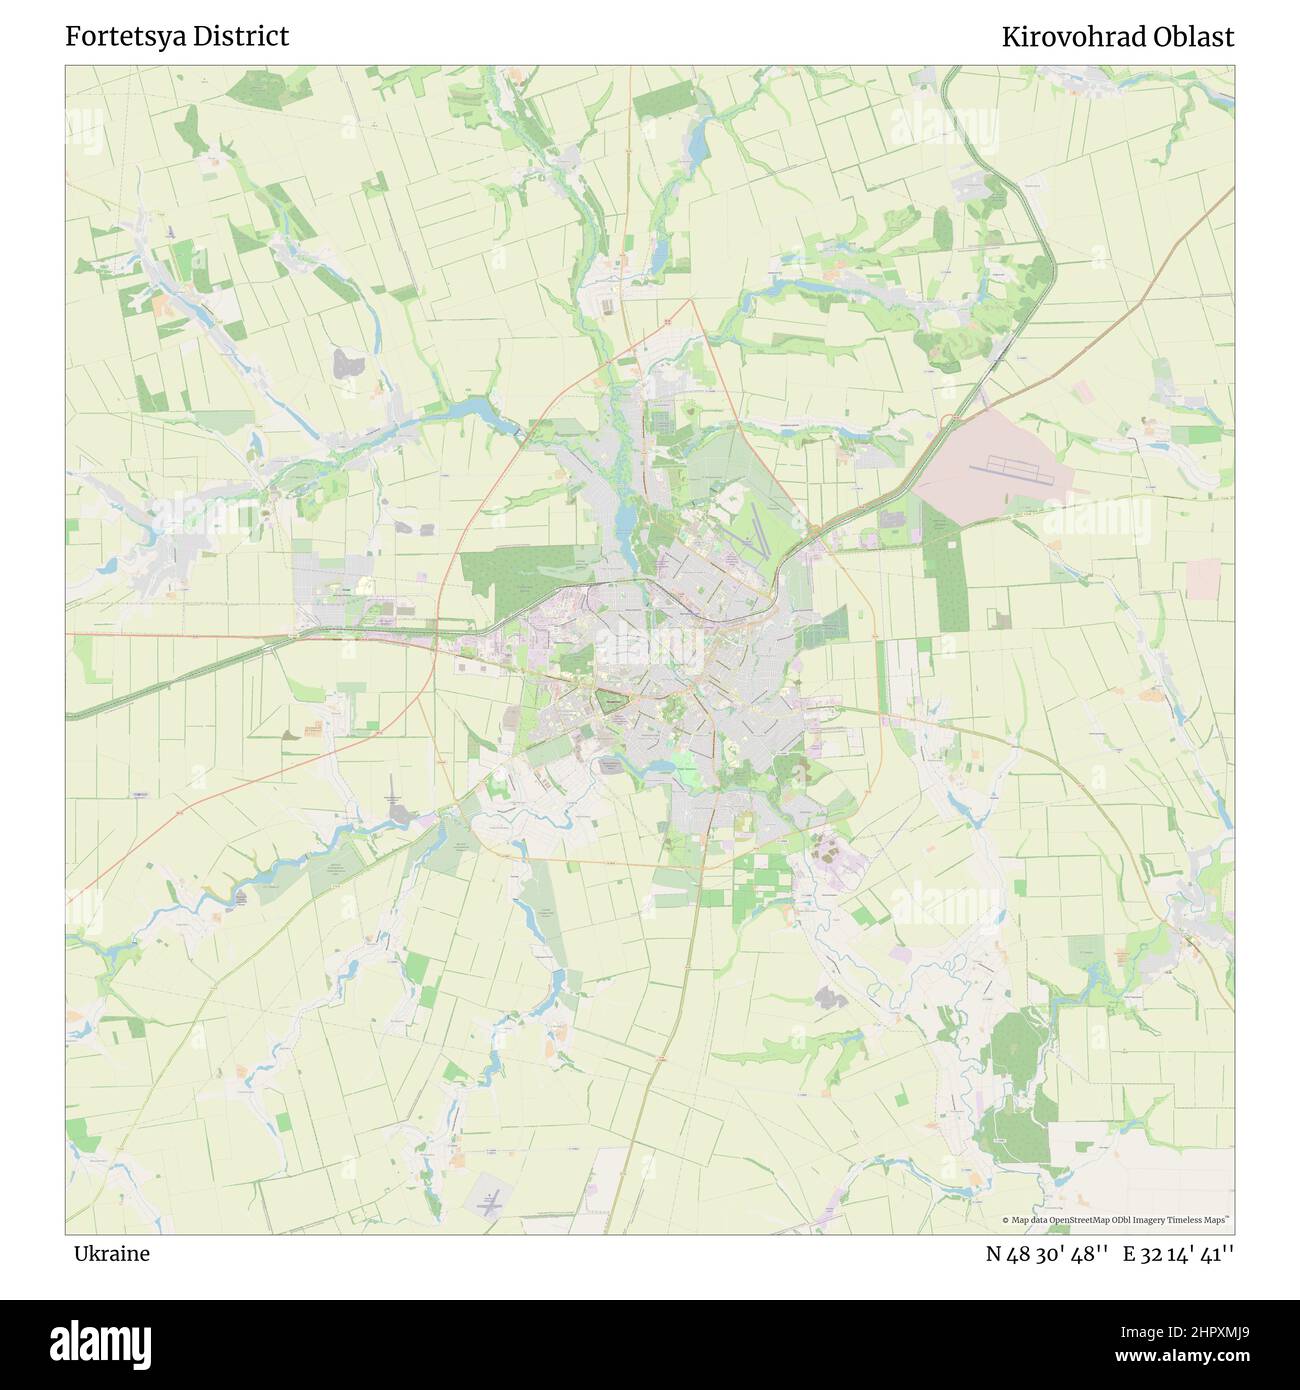 Fortetsya District, Ukraine, Kirovohrad Oblast, N 48 30' 48'', E 32 14' 41'', map, Timeless Map published in 2021. Travelers, explorers and adventurers like Florence Nightingale, David Livingstone, Ernest Shackleton, Lewis and Clark and Sherlock Holmes relied on maps to plan travels to the world's most remote corners, Timeless Maps is mapping most locations on the globe, showing the achievement of great dreams Stock Photo